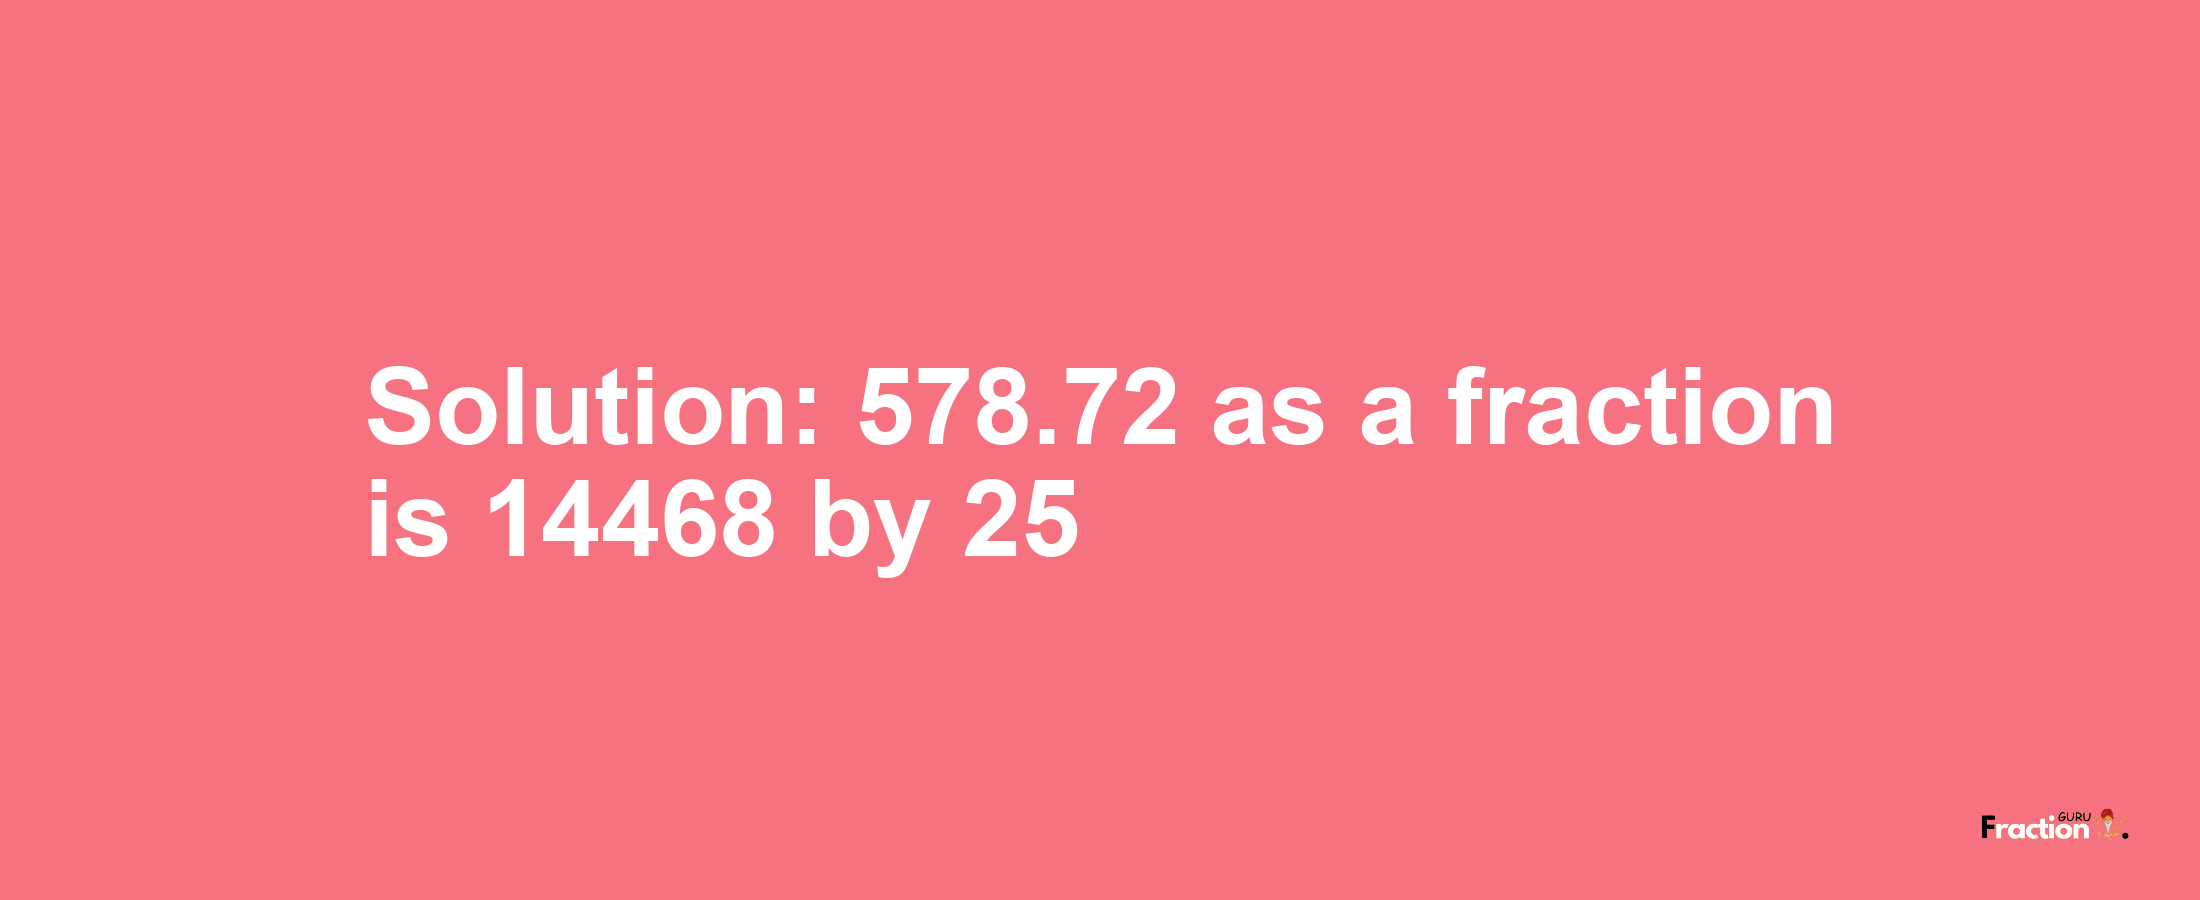 Solution:578.72 as a fraction is 14468/25